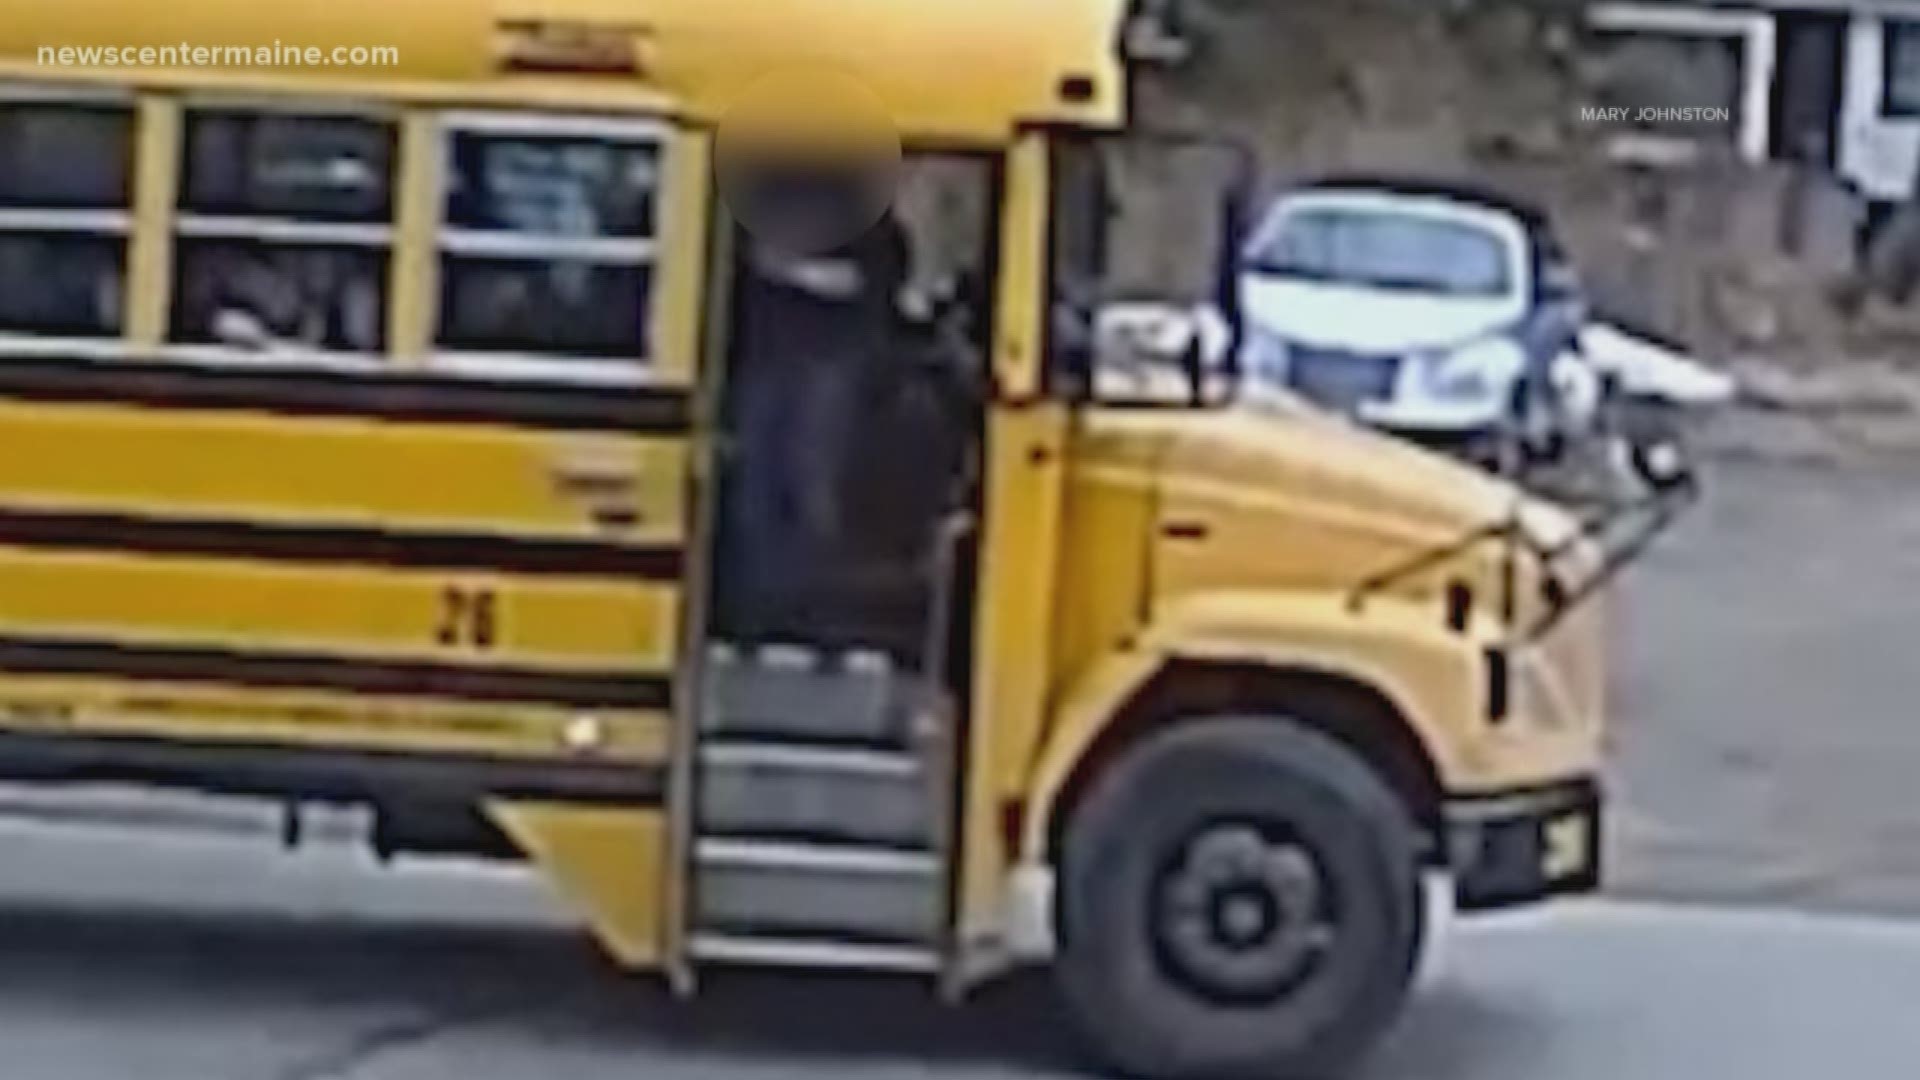 Sheriff's office investigating alleged shoving incident by Bath school bus driver